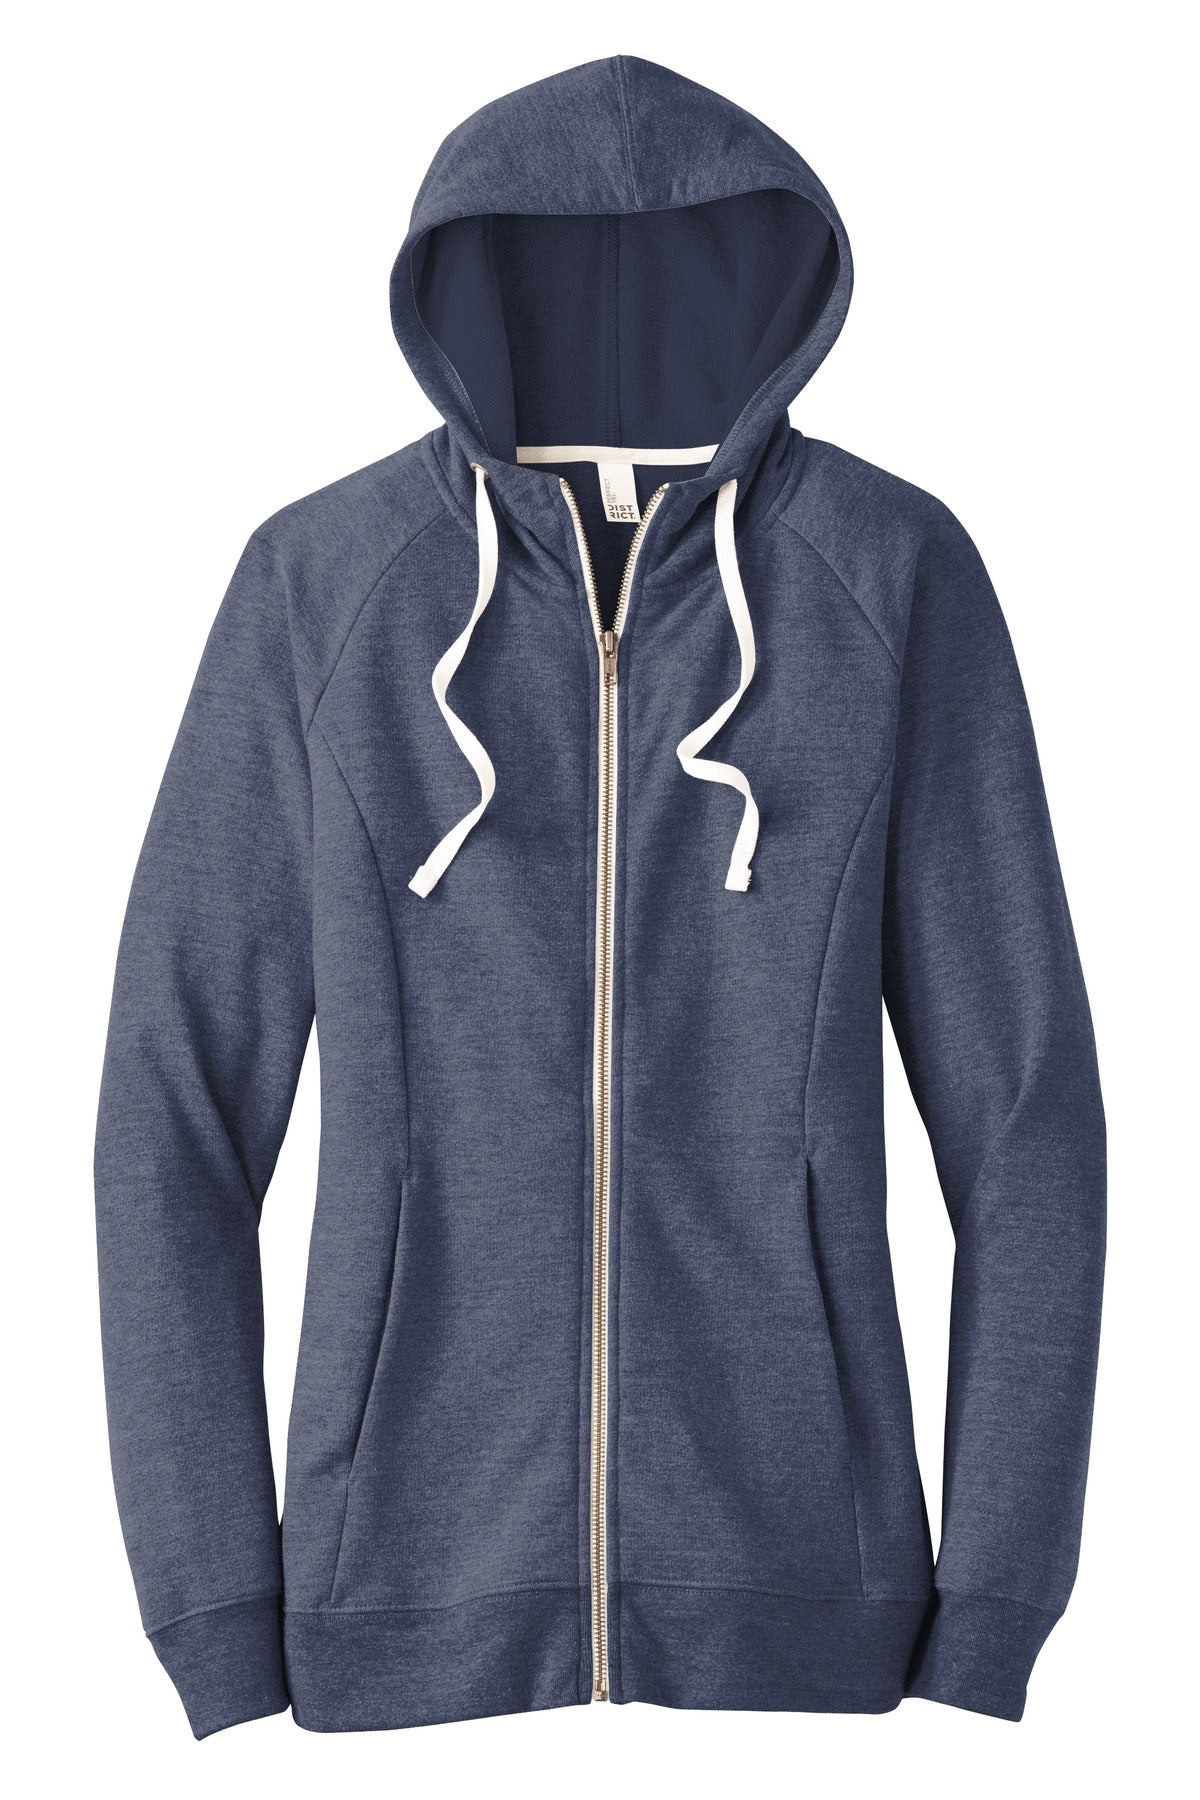 District Women's Perfect Tri French Terry Full-Zip Hoodie. DT456